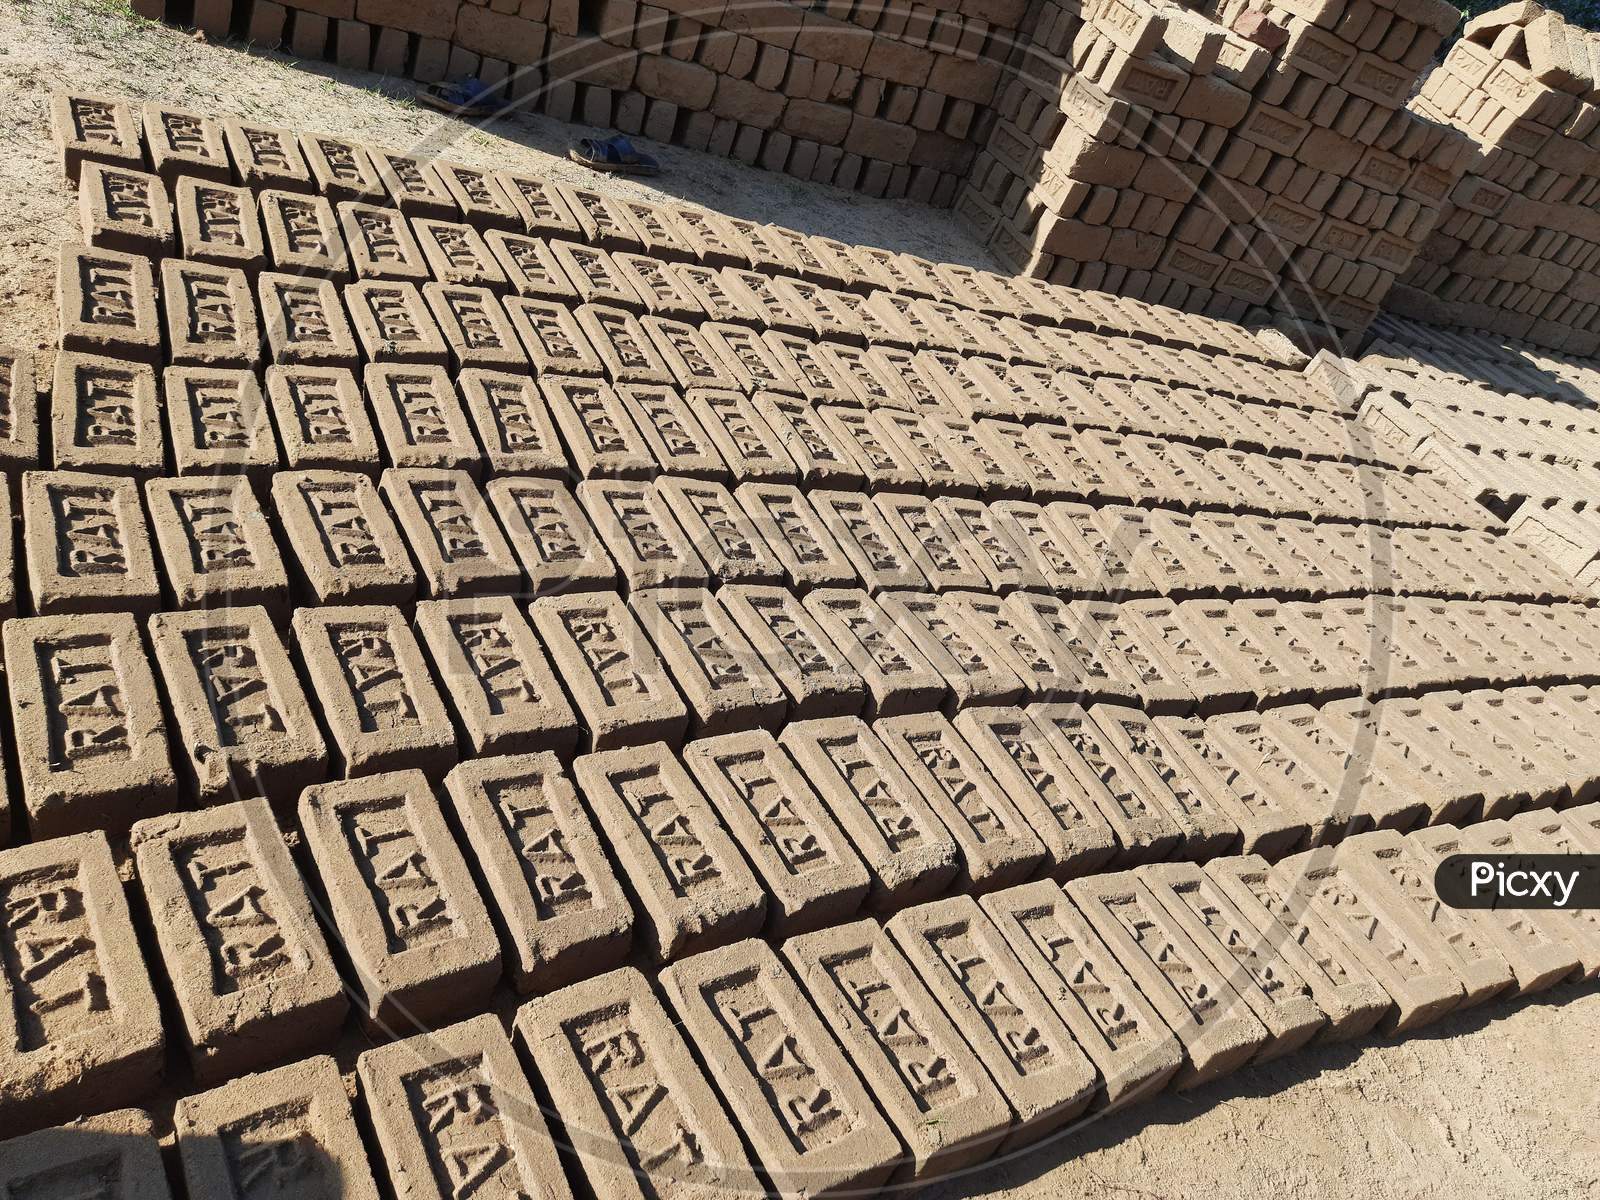 Raw brick laid out in stacks for drying.